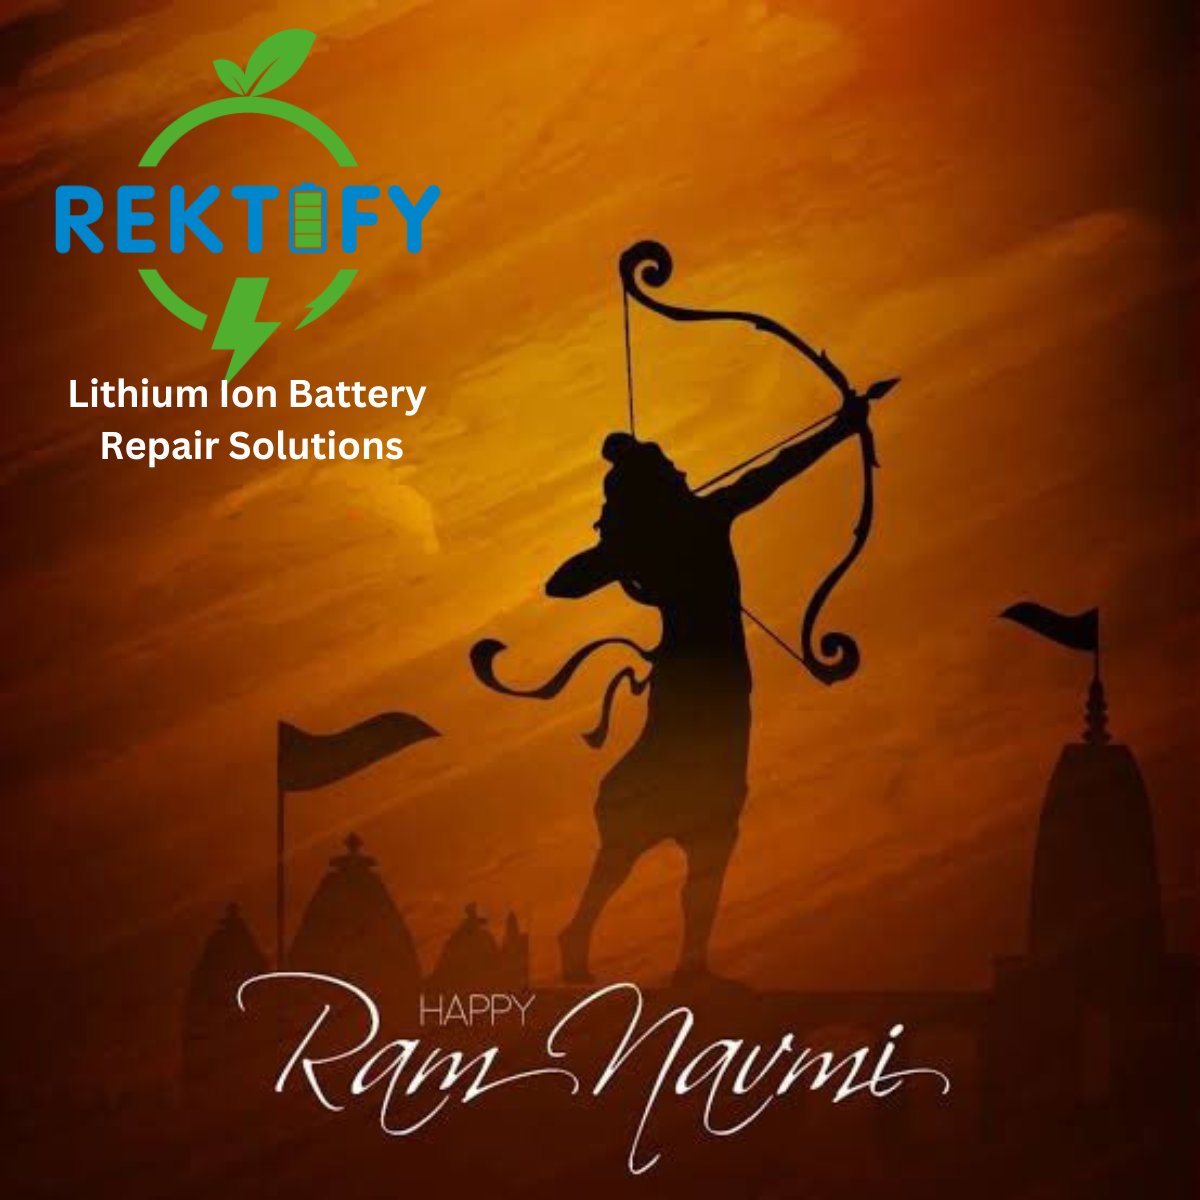 Let us all come together to celebrate the birth of Lord Ram and embrace his teachings of love, compassion, and righteousness. #RamNavmi #AfterSalesService #LithiumIon #Battery #EV #EVindia #goelectric #electricvehicles #electricmobility  #urbanmobility #EV2W  #EV3W #india